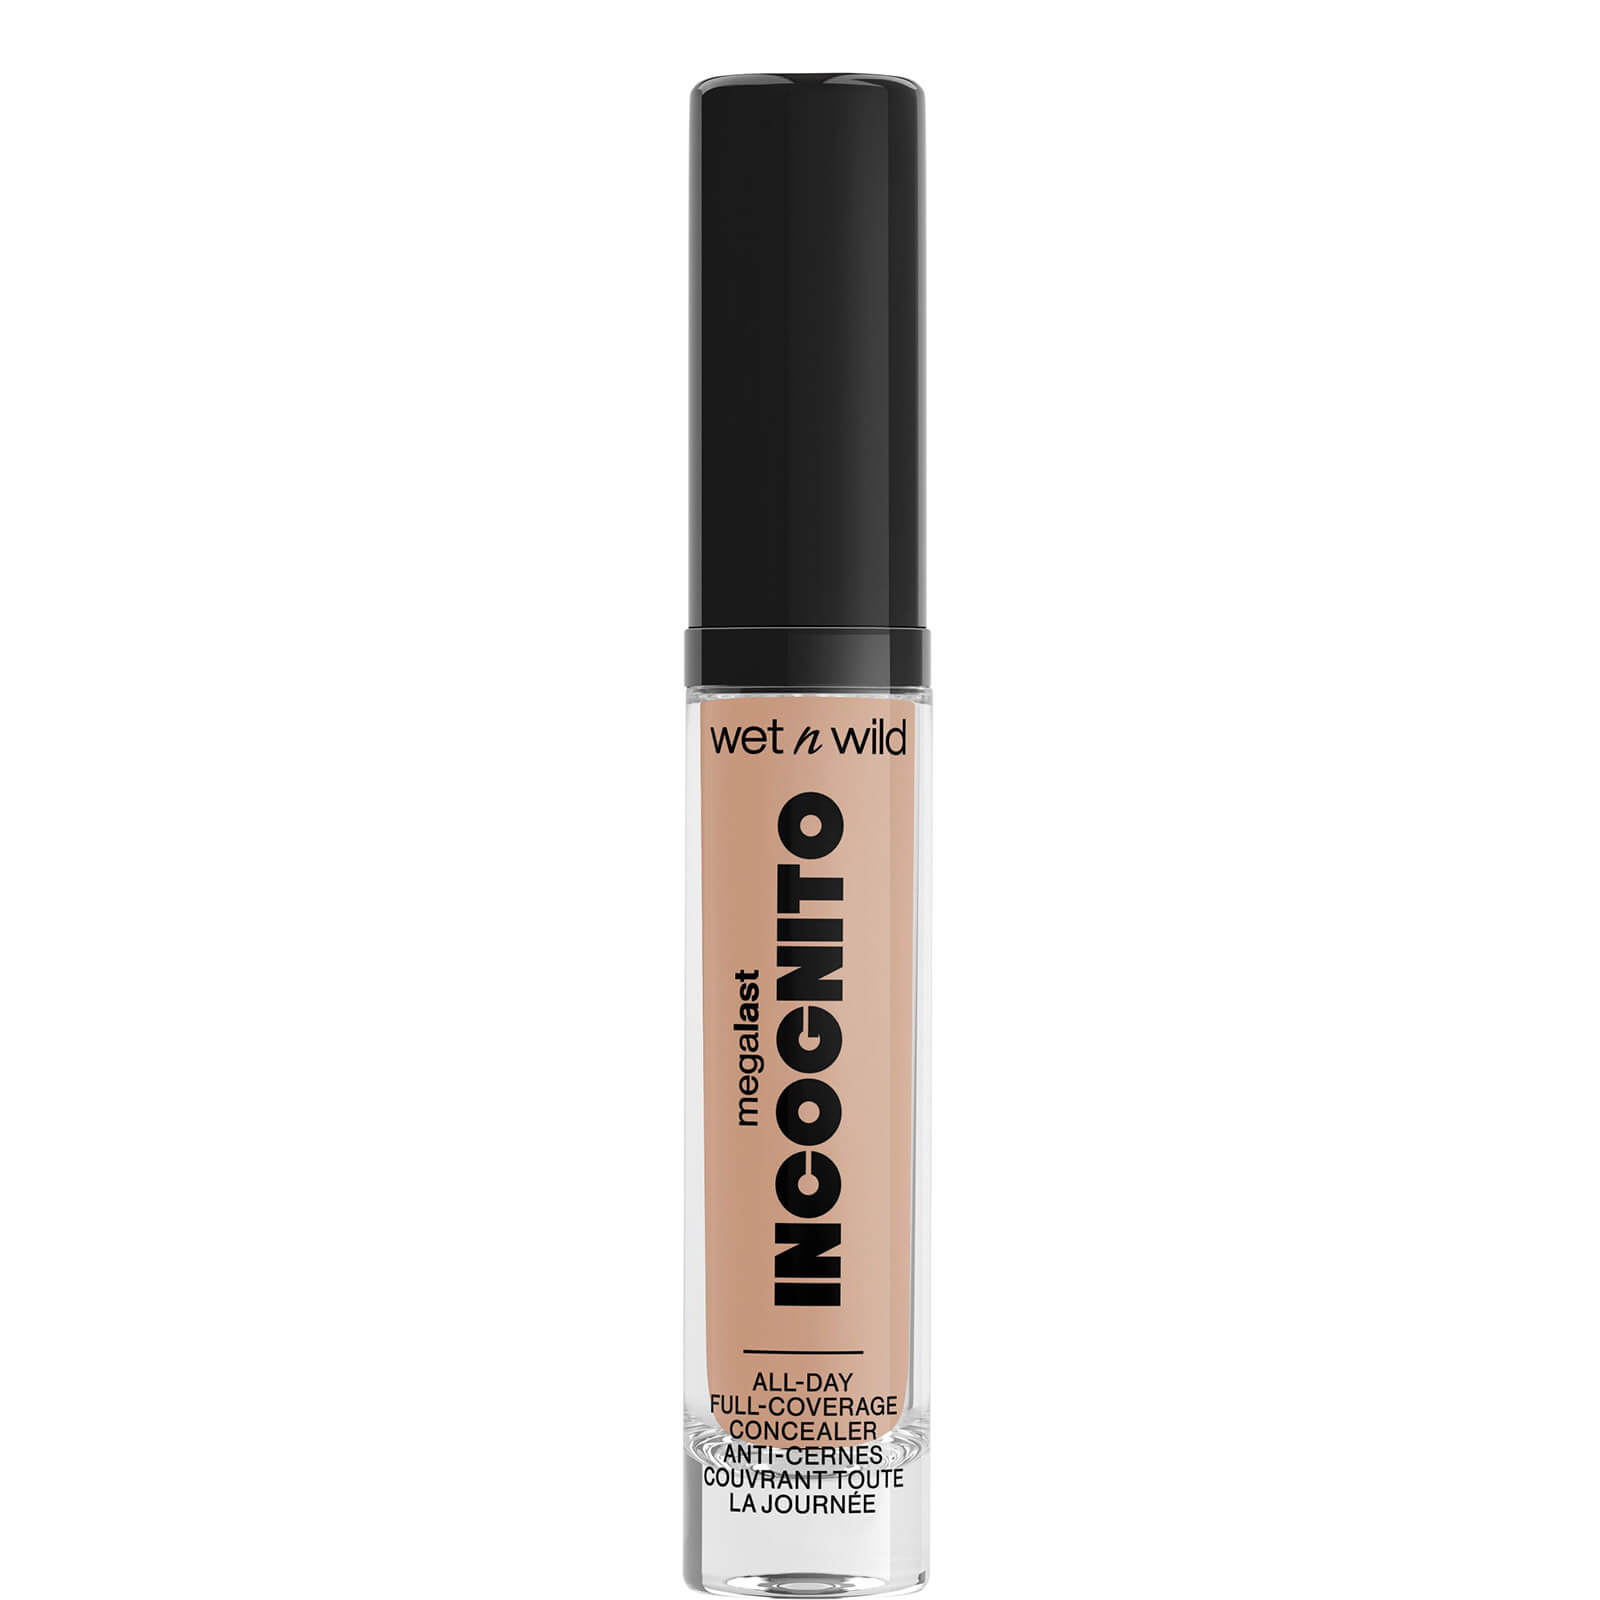 Wet N Wild Megalast Incognito Full-coverage Concealer 5.5ml (various Shades) - Light Honey